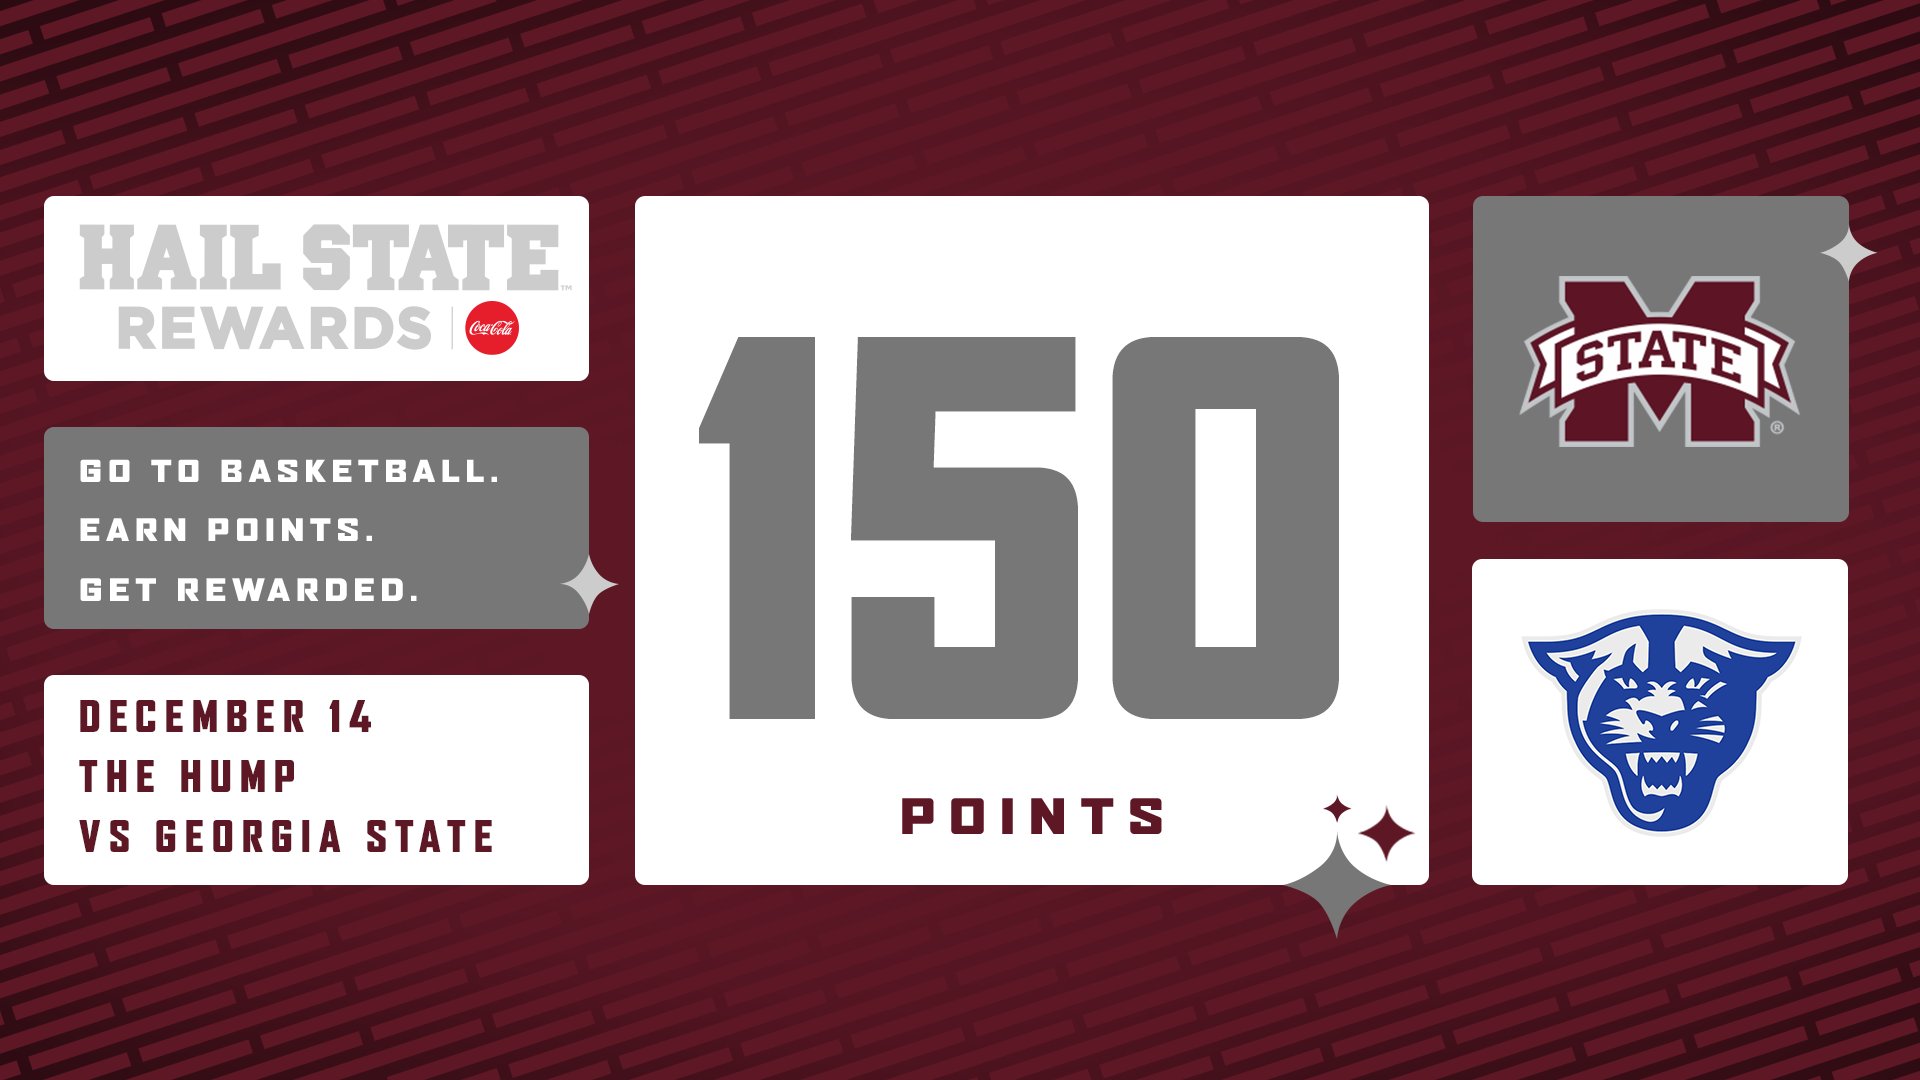 Maroon, white and gray graphic announcing that Hail State Rewards members will receive 150 points for attendance at MSU's Dec. 14 men's basketball game versus Georgia State